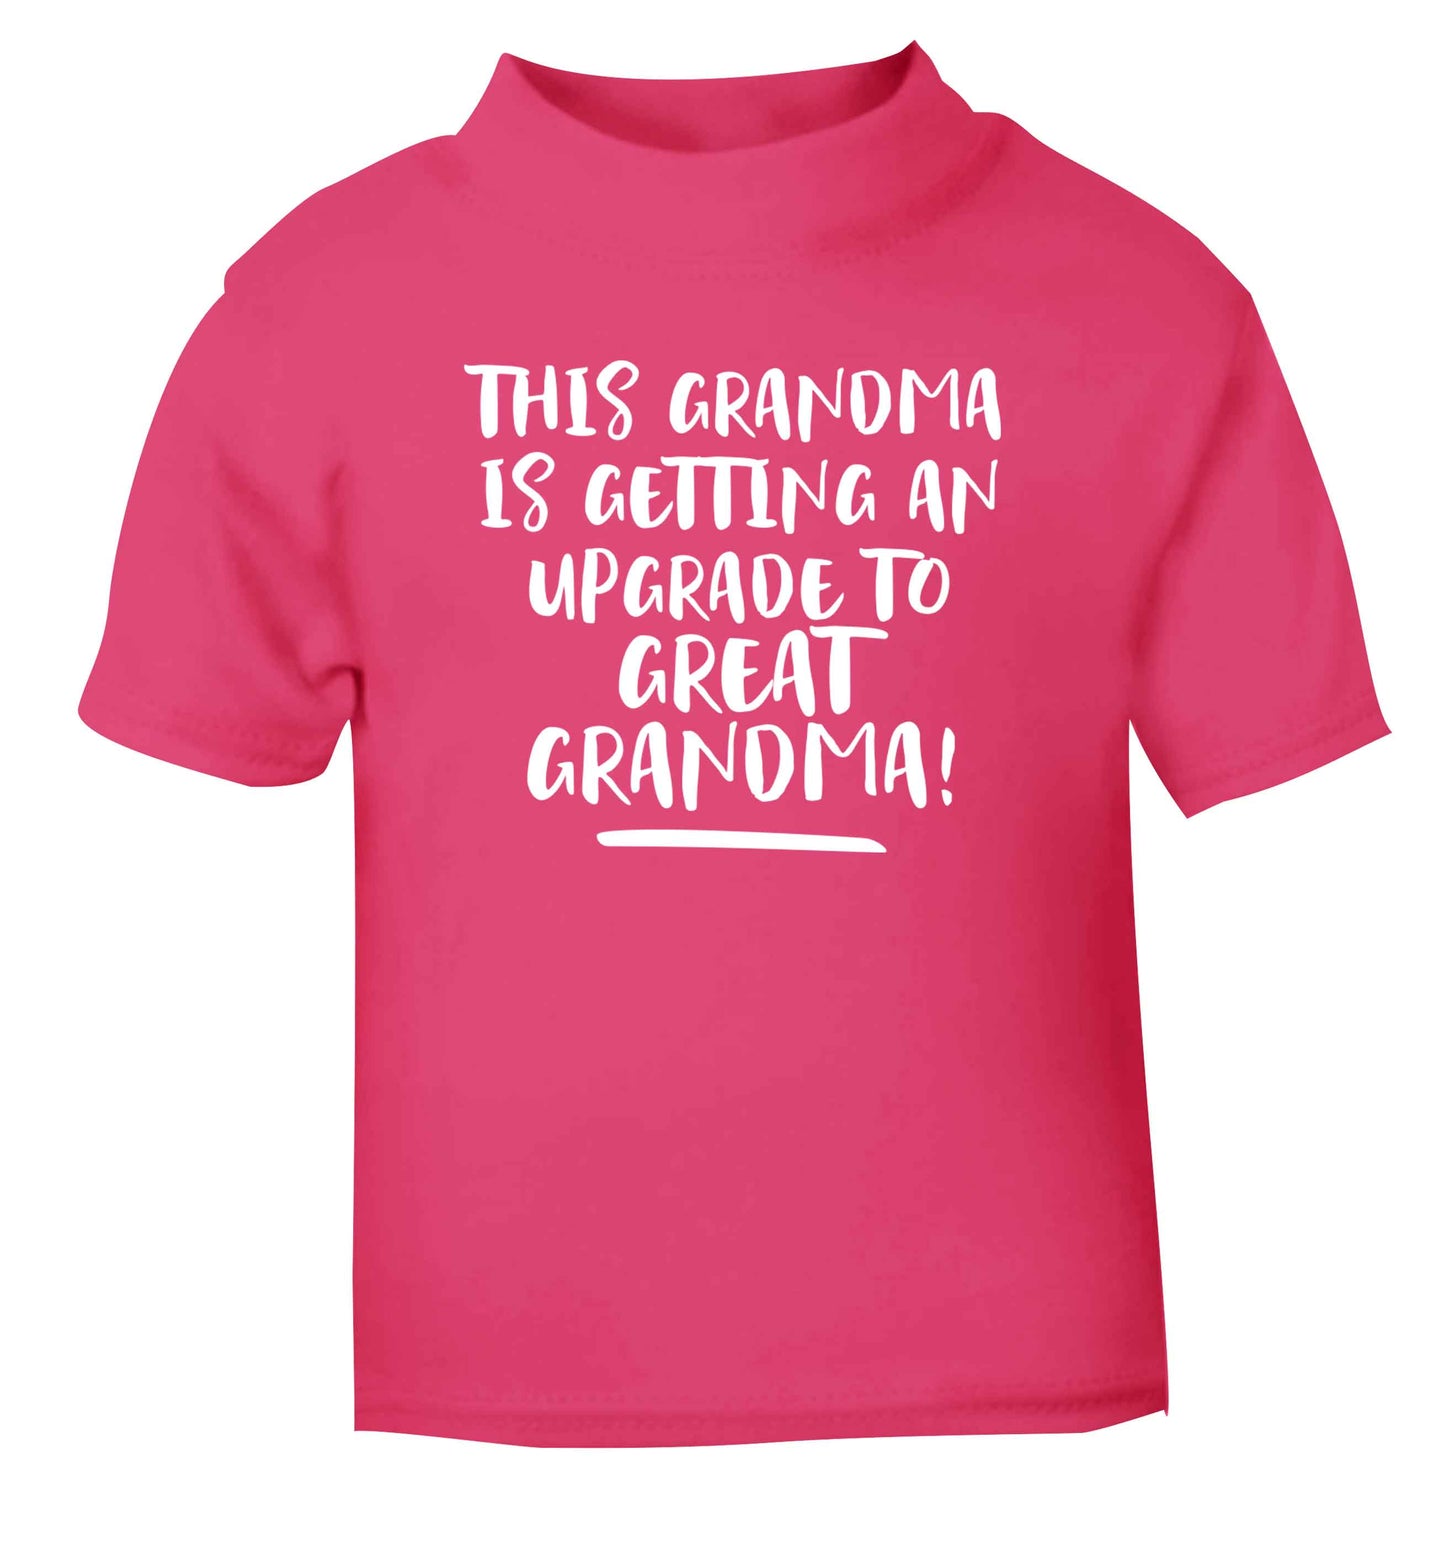 This grandma is getting an upgrade to great grandma! pink Baby Toddler Tshirt 2 Years